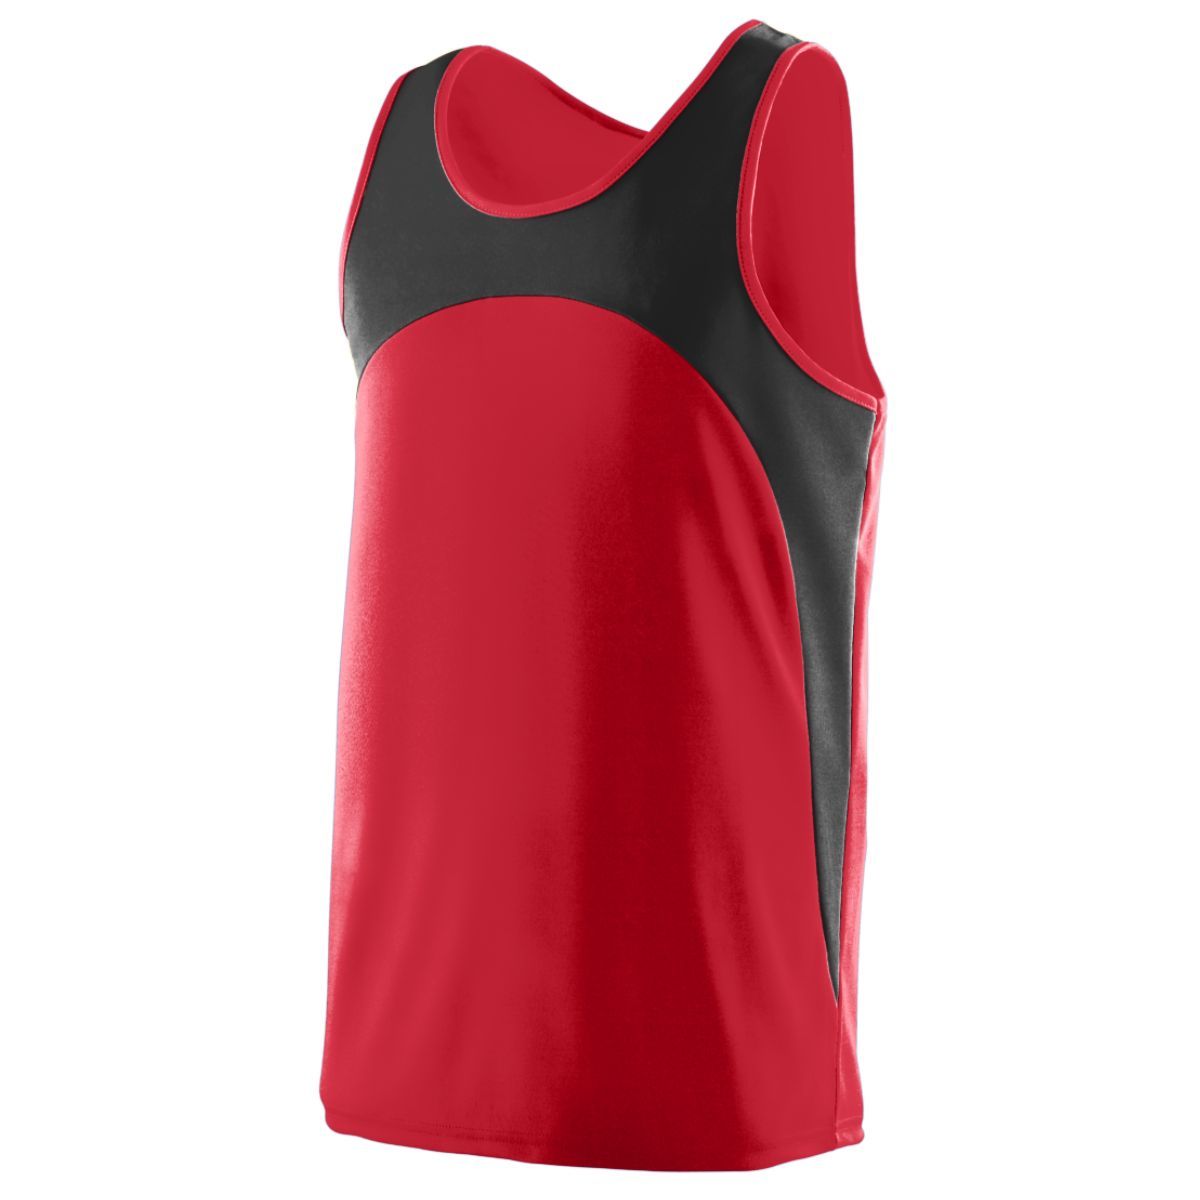 Youth Rapidpace Track Jersey 341